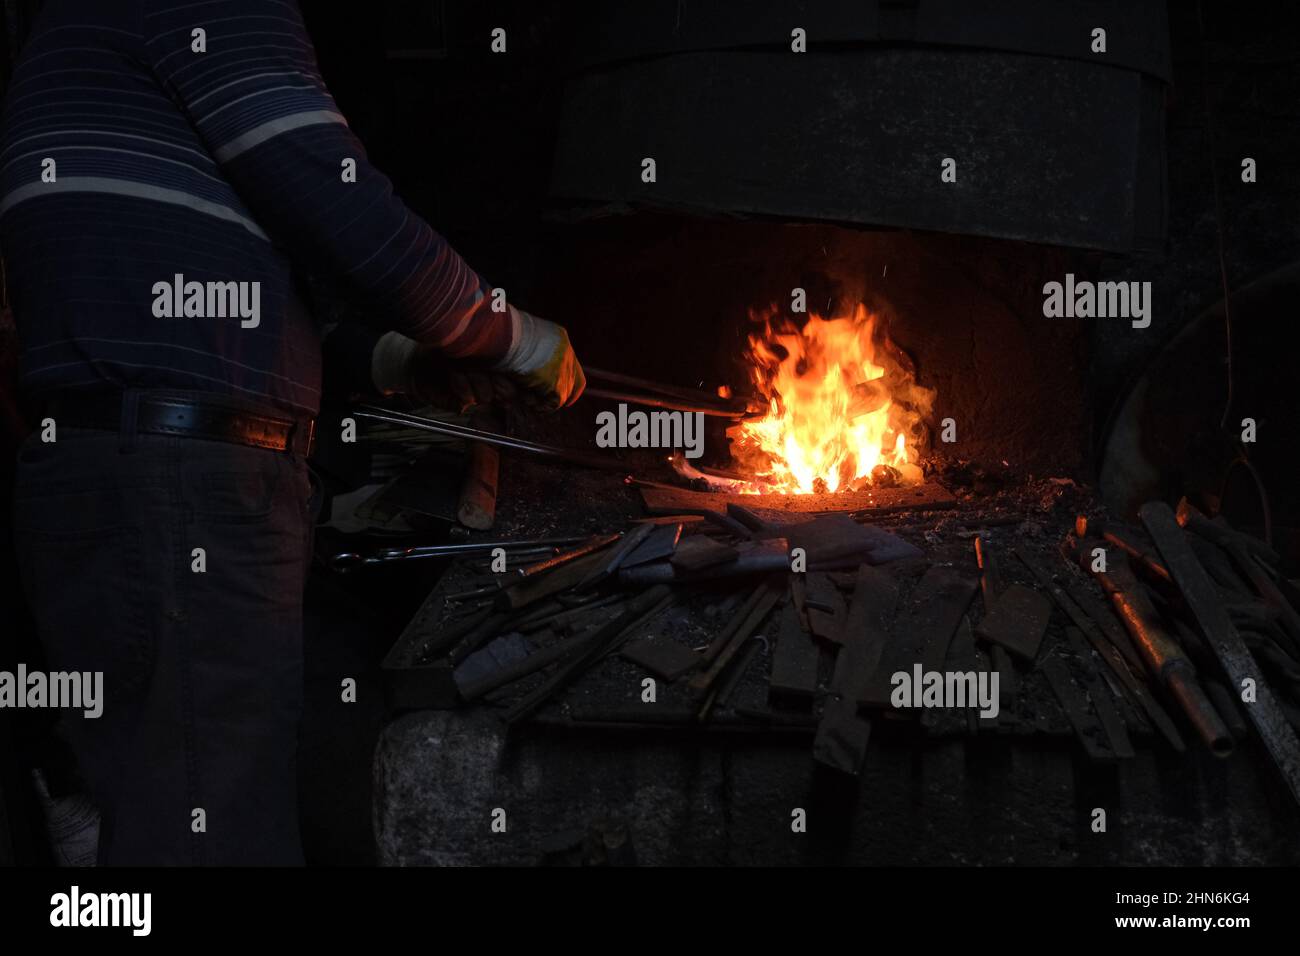 Blacksmiths and fire, hand made metal working of forging at fire. Stock Photo